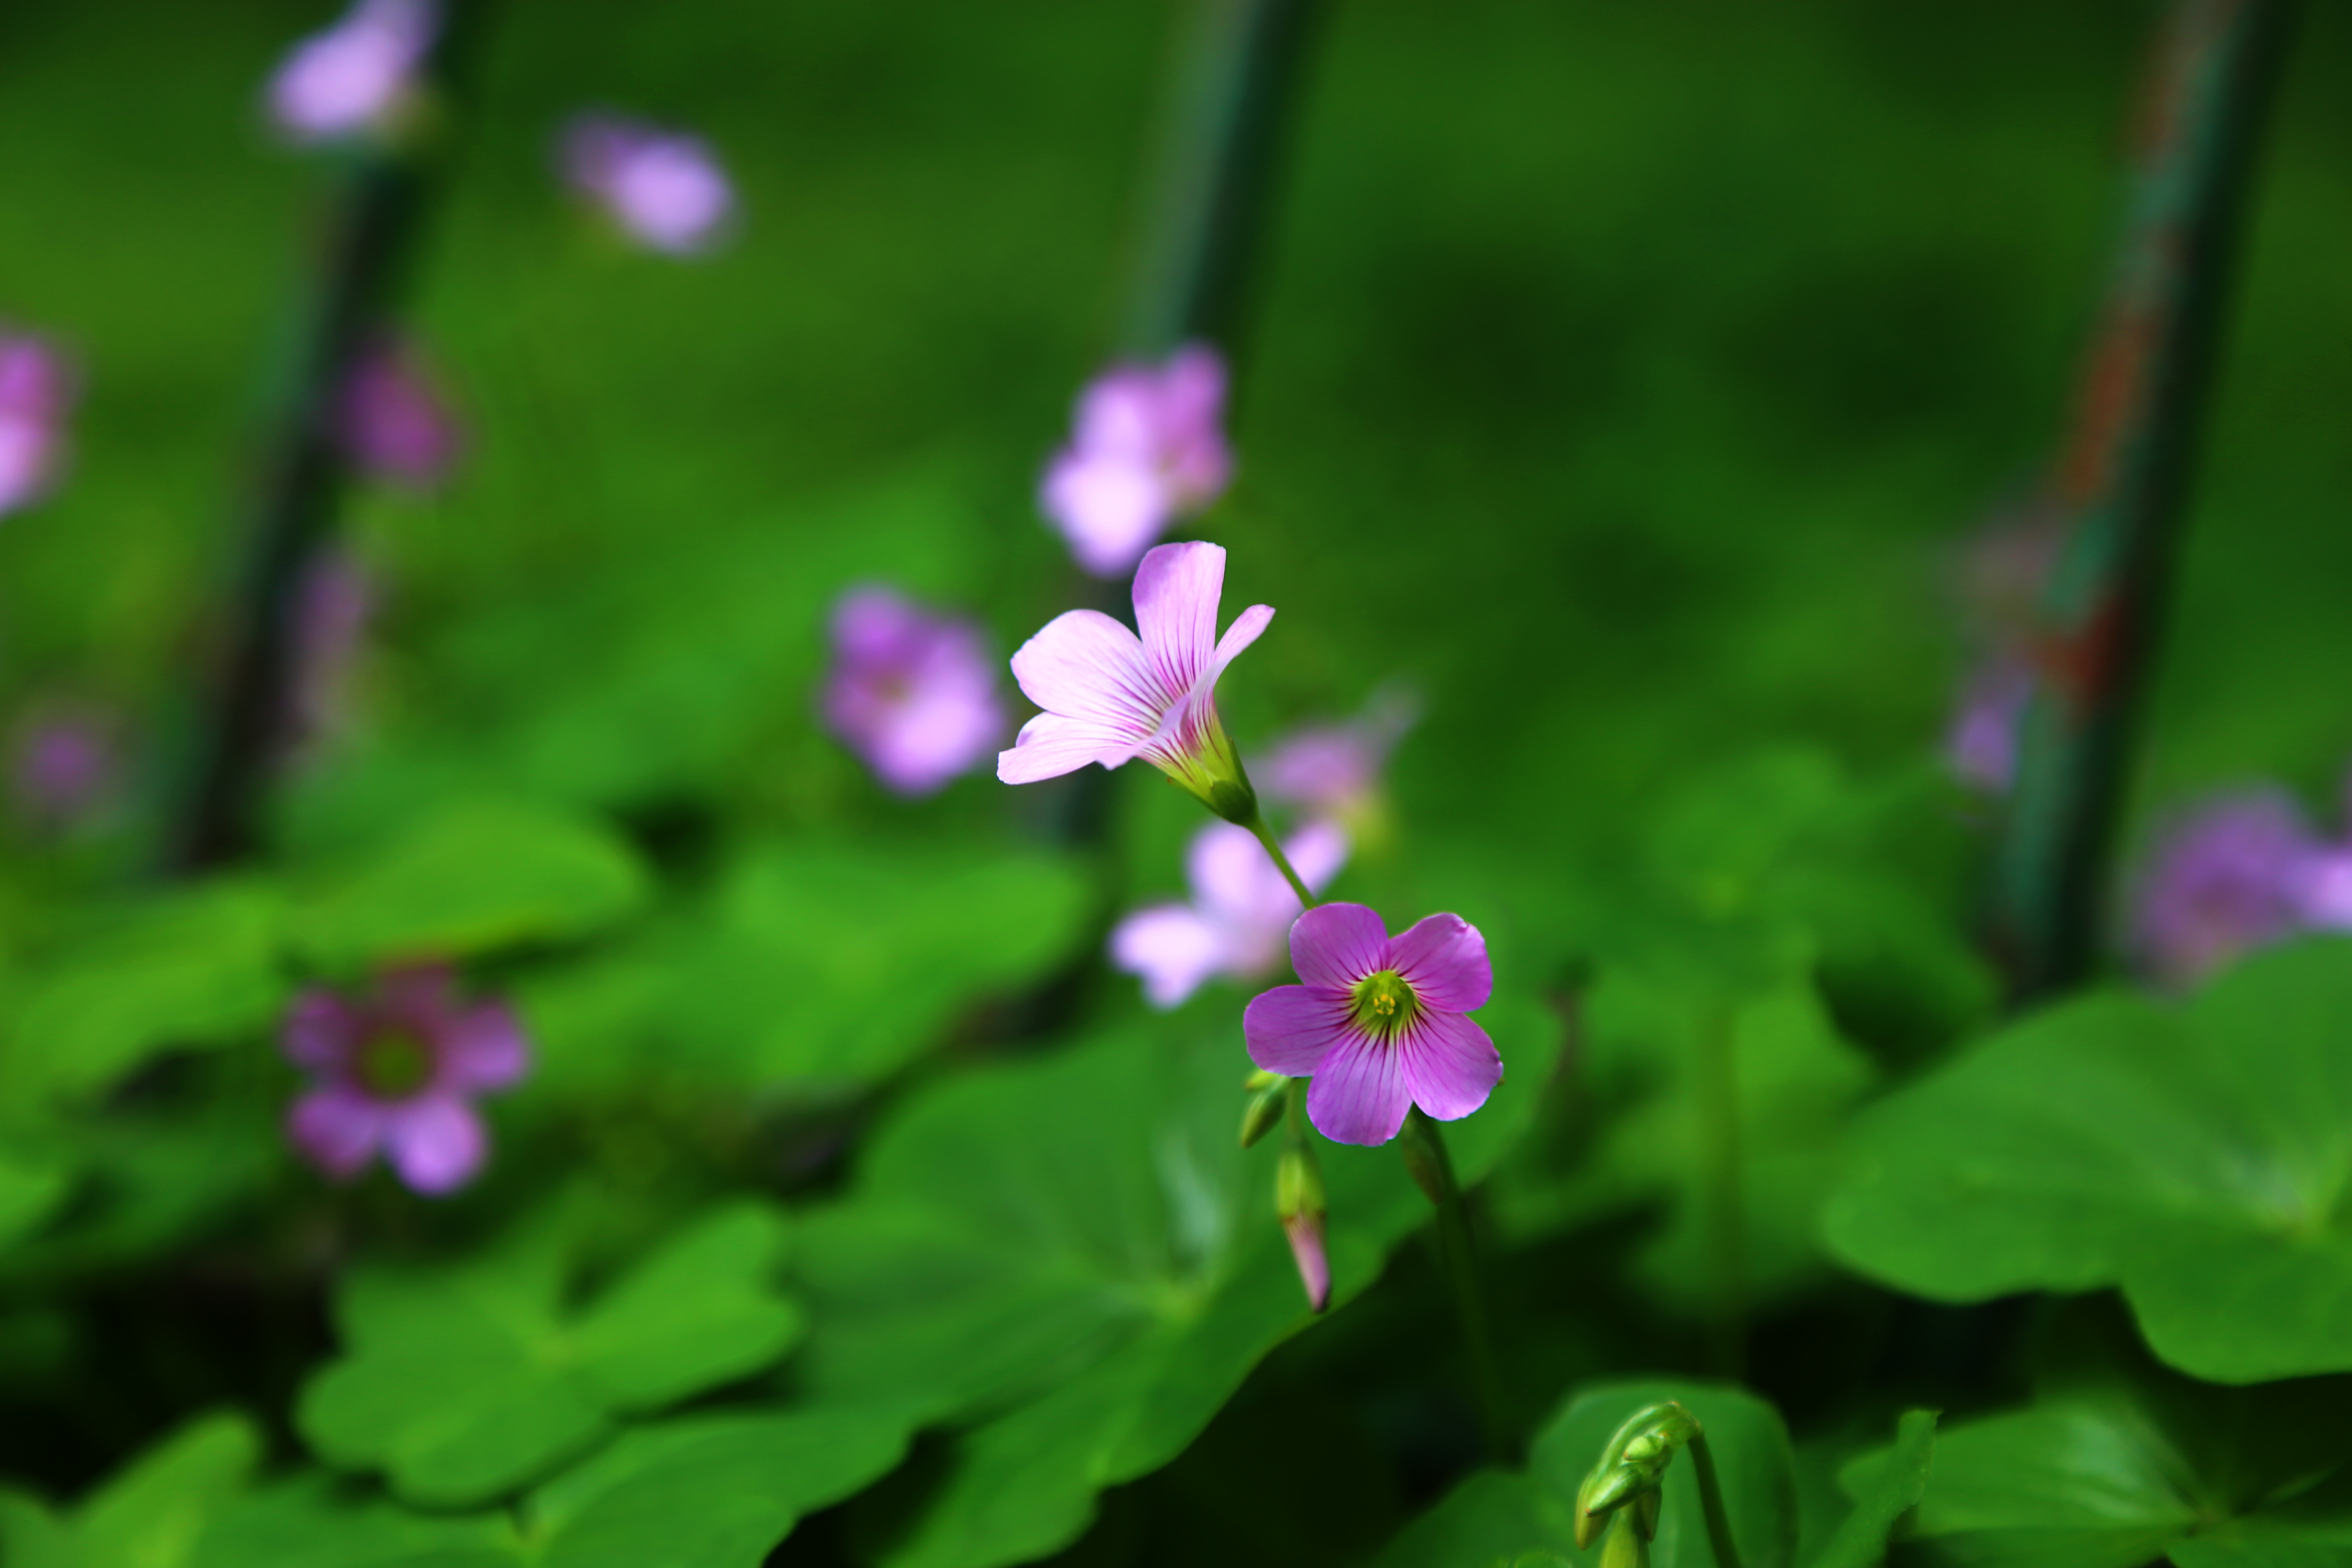 General 5472x3648 green plants spring leaves nature flowers closeup blurred blurry background